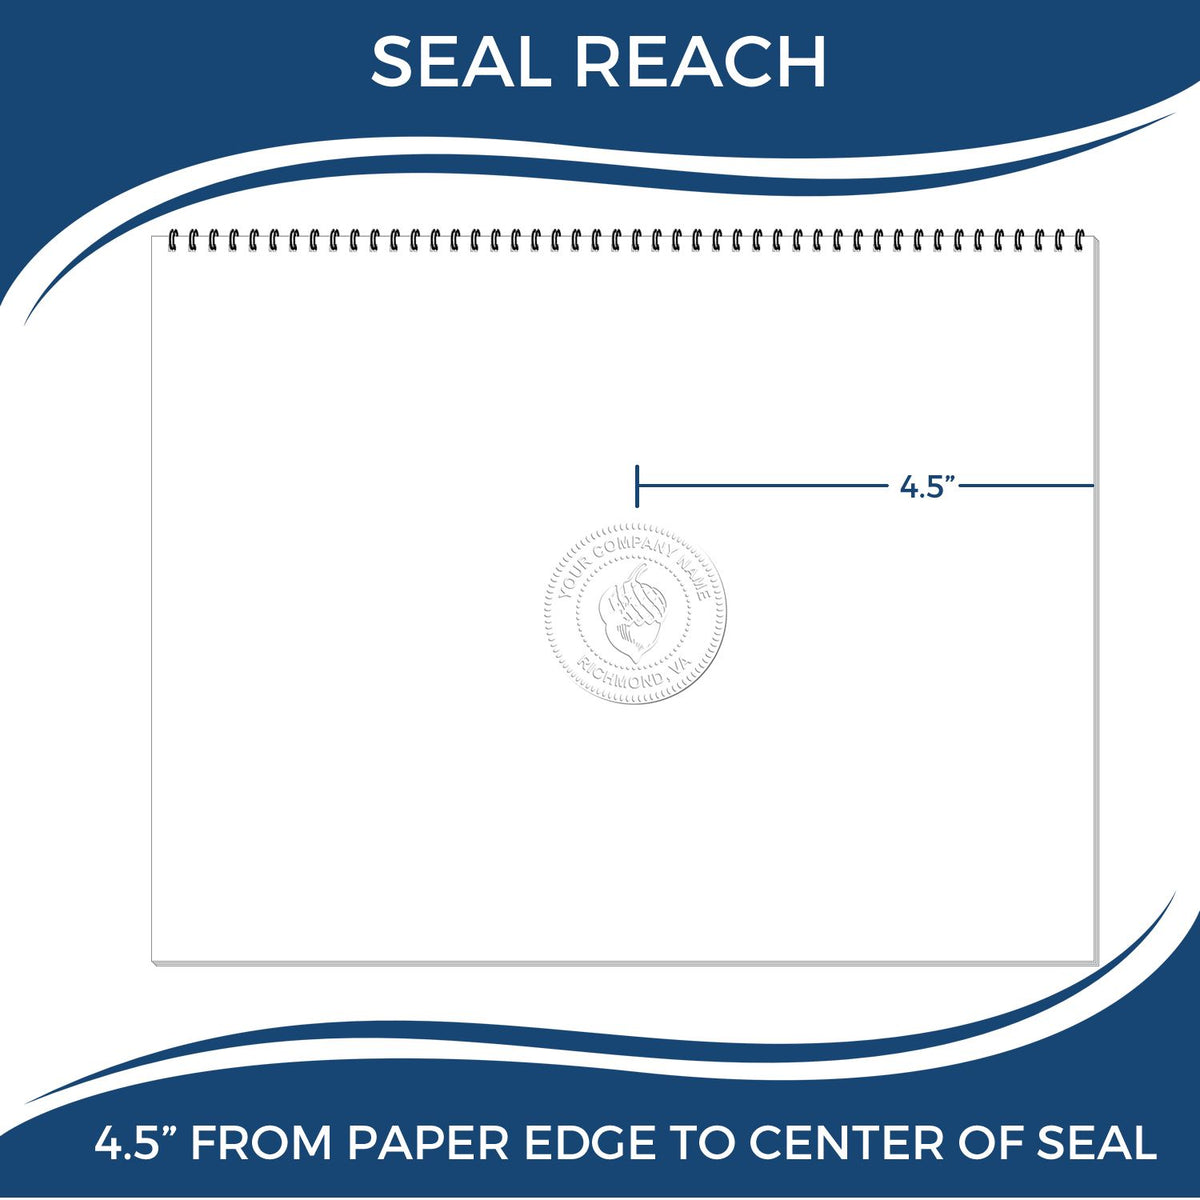 An infographic showing the seal reach which is represented by a ruler and a miniature seal image of the Extended Long Reach Montana Surveyor Embosser